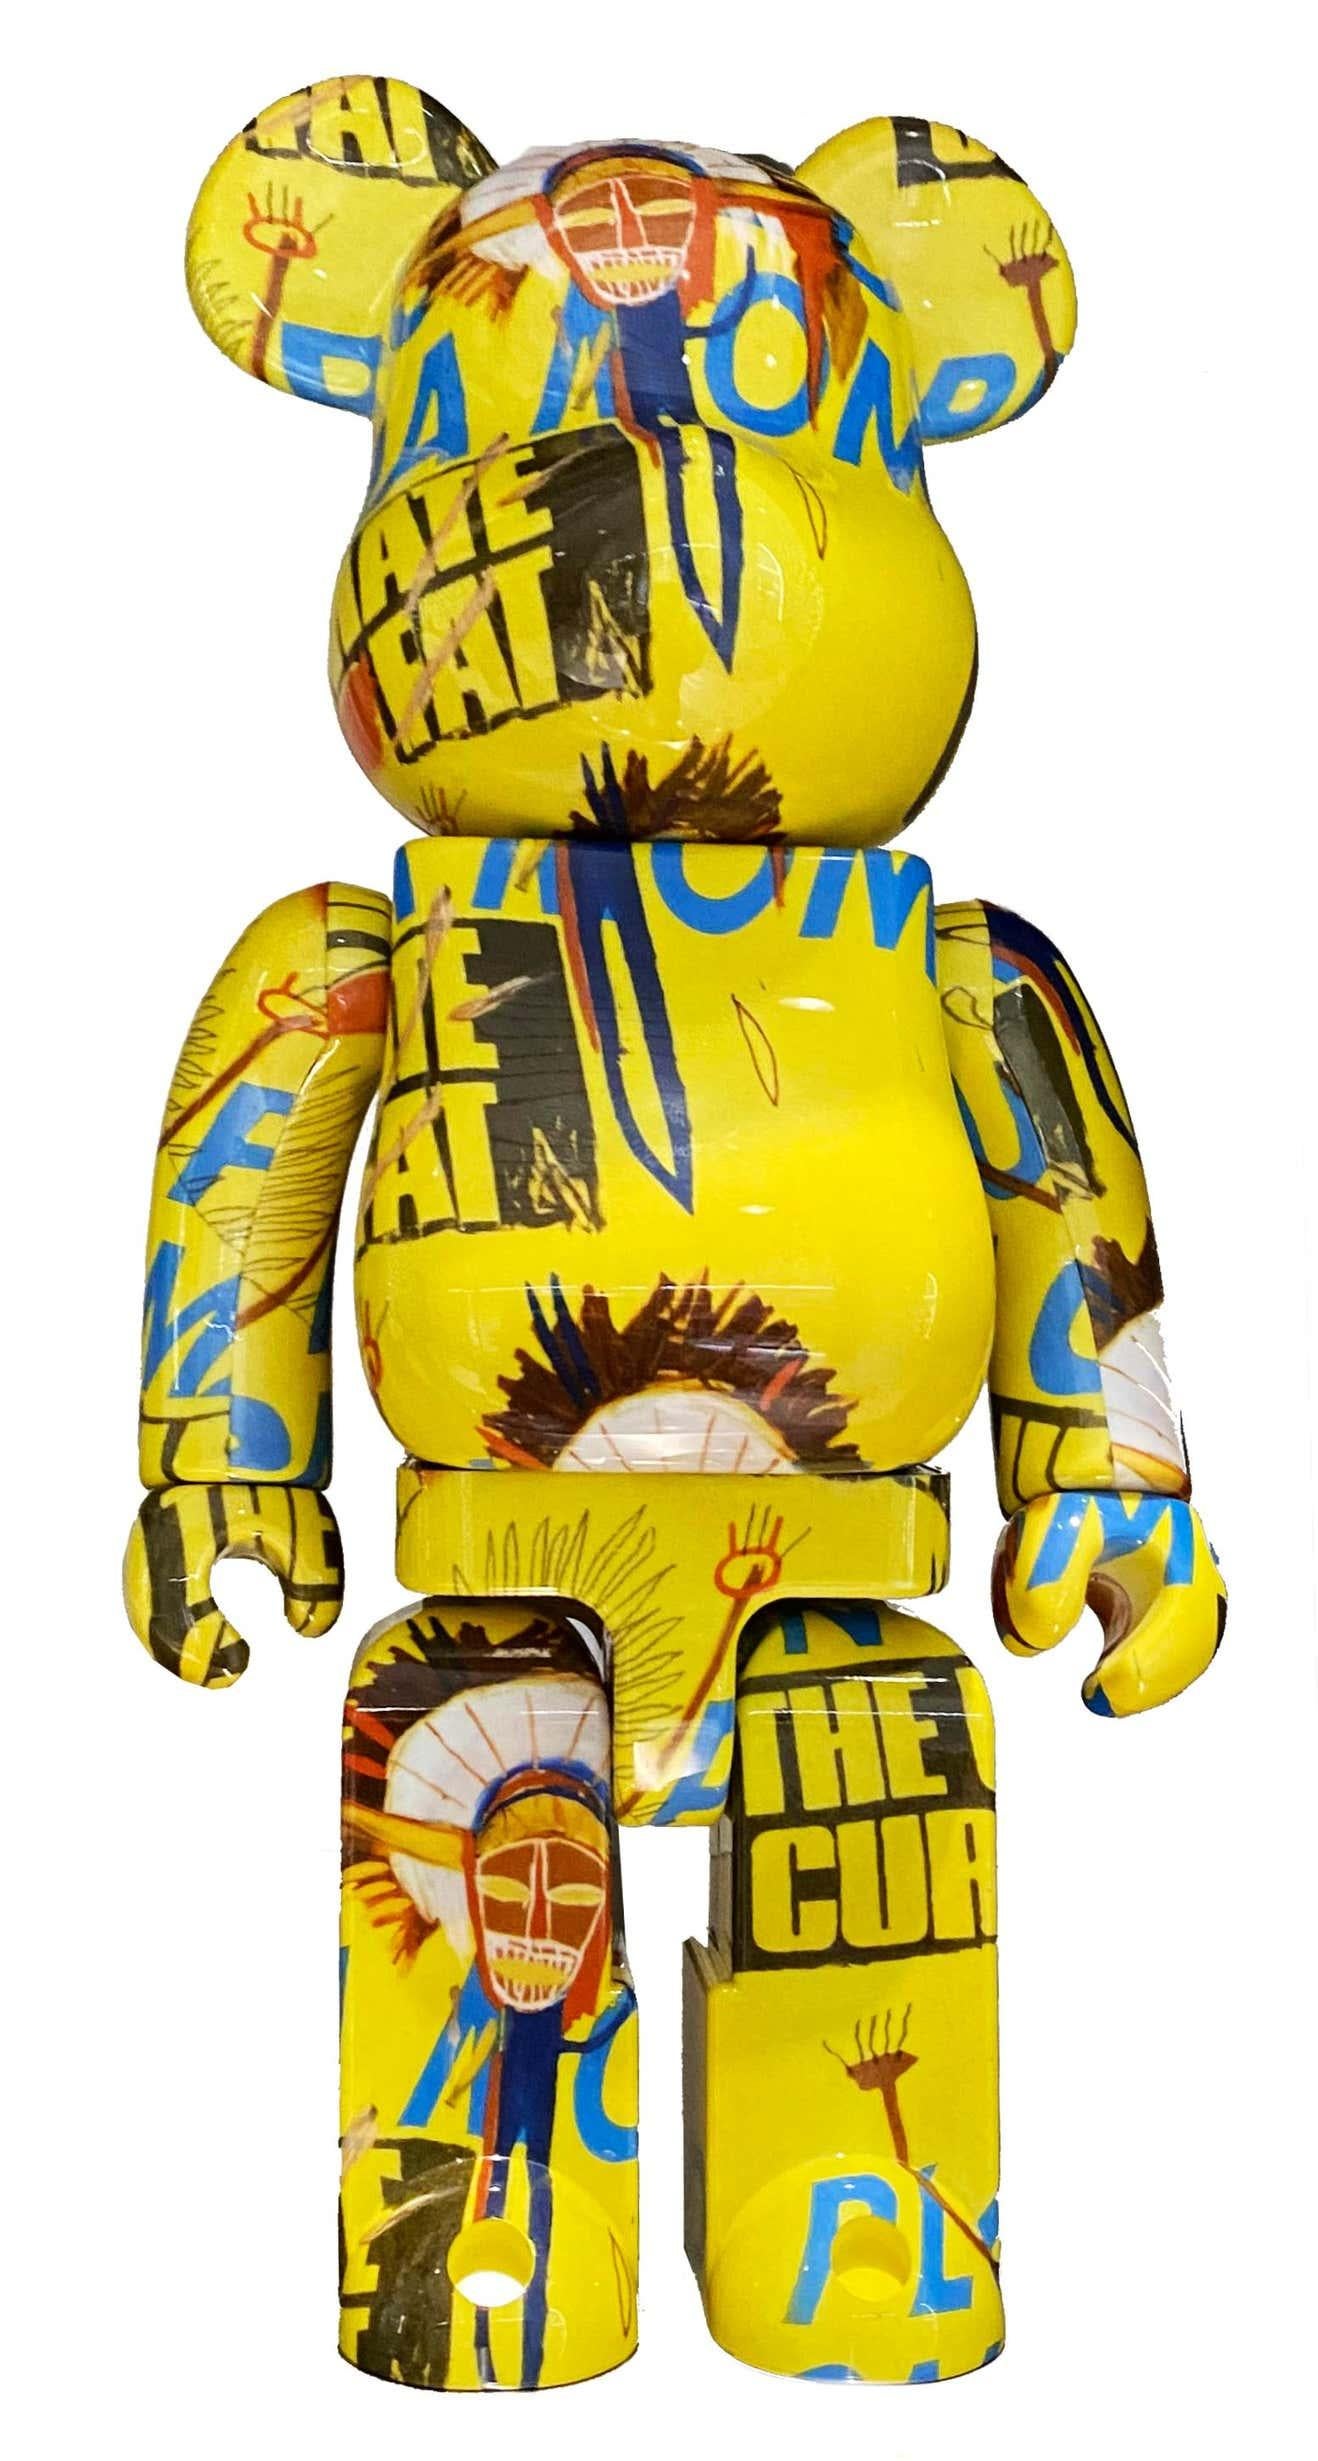 Bearbrick and Andy Warhol Foundation and Estate of Jean-Michel Basquiat Vinyl Figures: Set of two 400%:
Unique, timeless collectibles trademarked & licensed by the Estates of Jean-Michel Basquiat & Andy Warhol. The partnered collectibles reveal